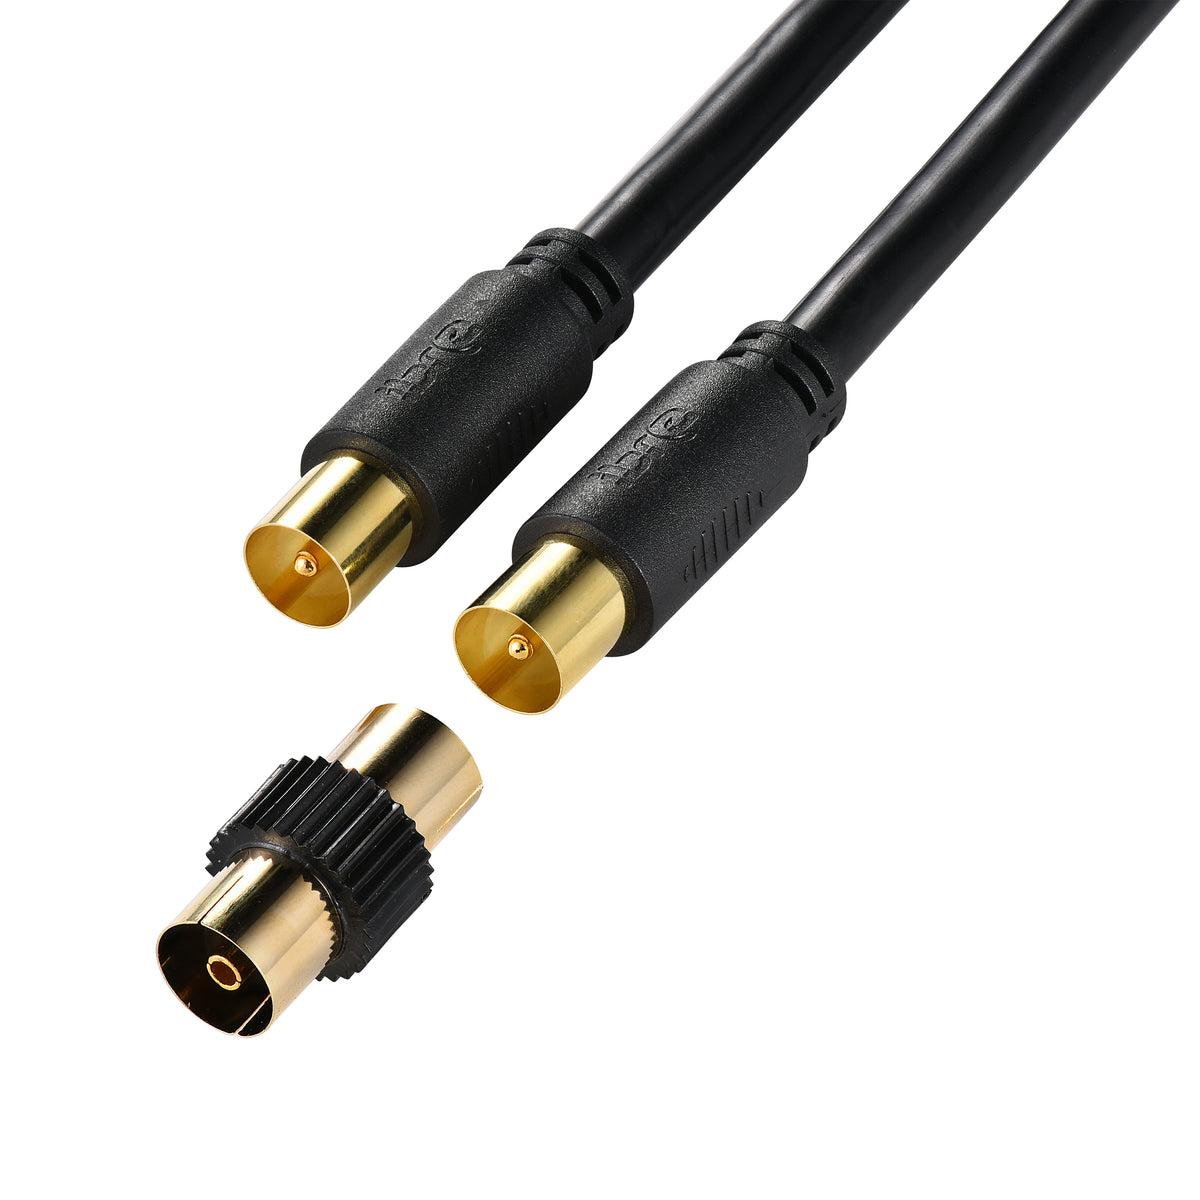 IBRA Aerial Coaxial Cable 0.5M with Gold-Plated Connectors, Male to Male RF Coax Lead with Female Adapter Coupler for Freeview, Freesat, Sky, Virgin, BT, You View, Satellite TV - Black